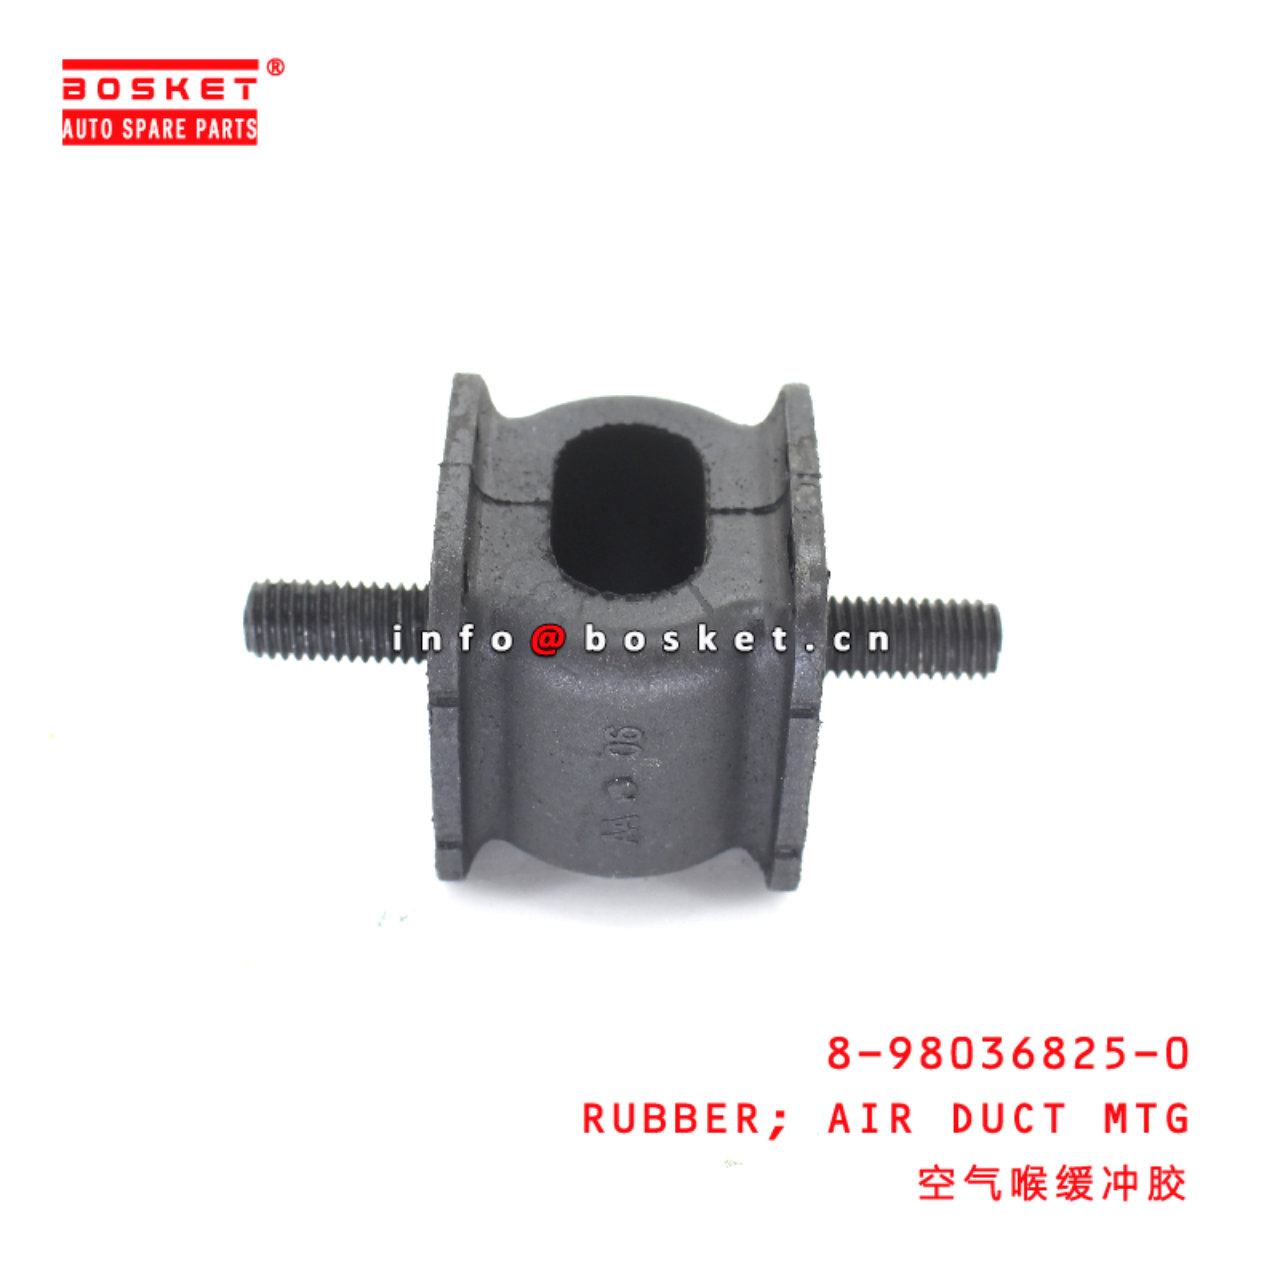 8-98036825-0 Air Duct Mounting Rubber suitable for ISUZU 700P 4HK1 8980368250